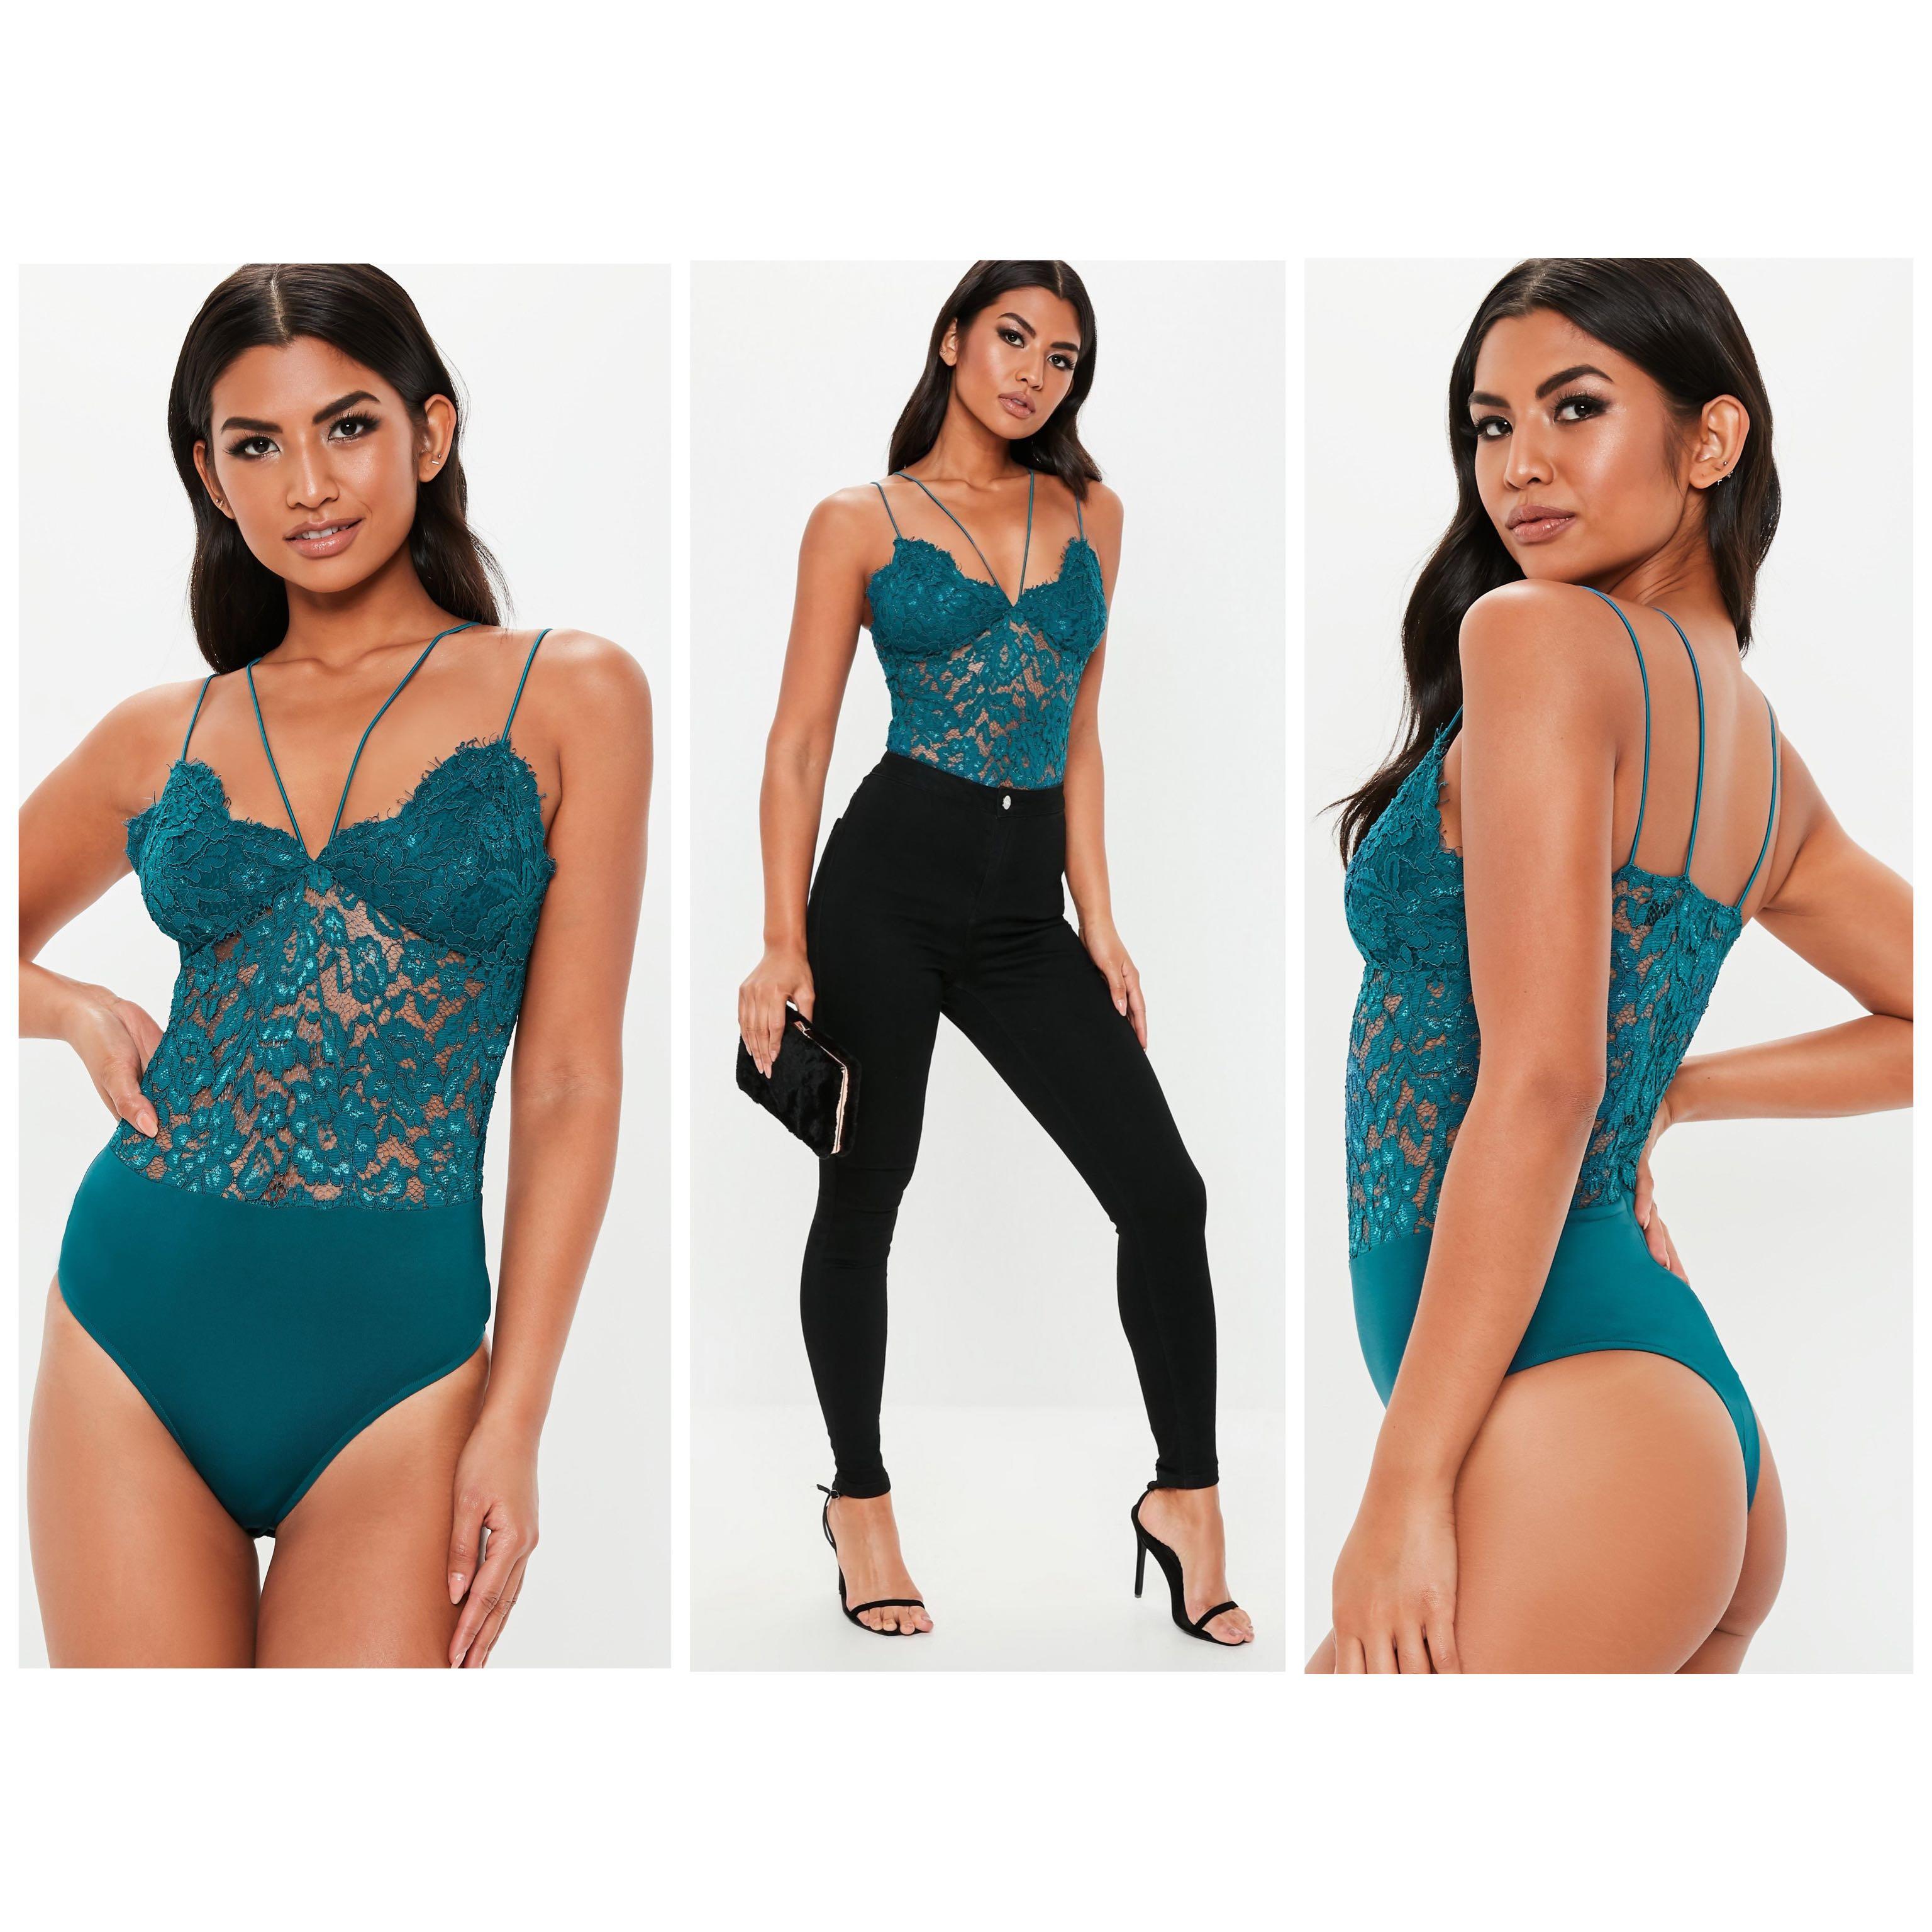 ASOS Missguided Sexy Lace Strappy Bodysuit, Women's Fashion, Tops